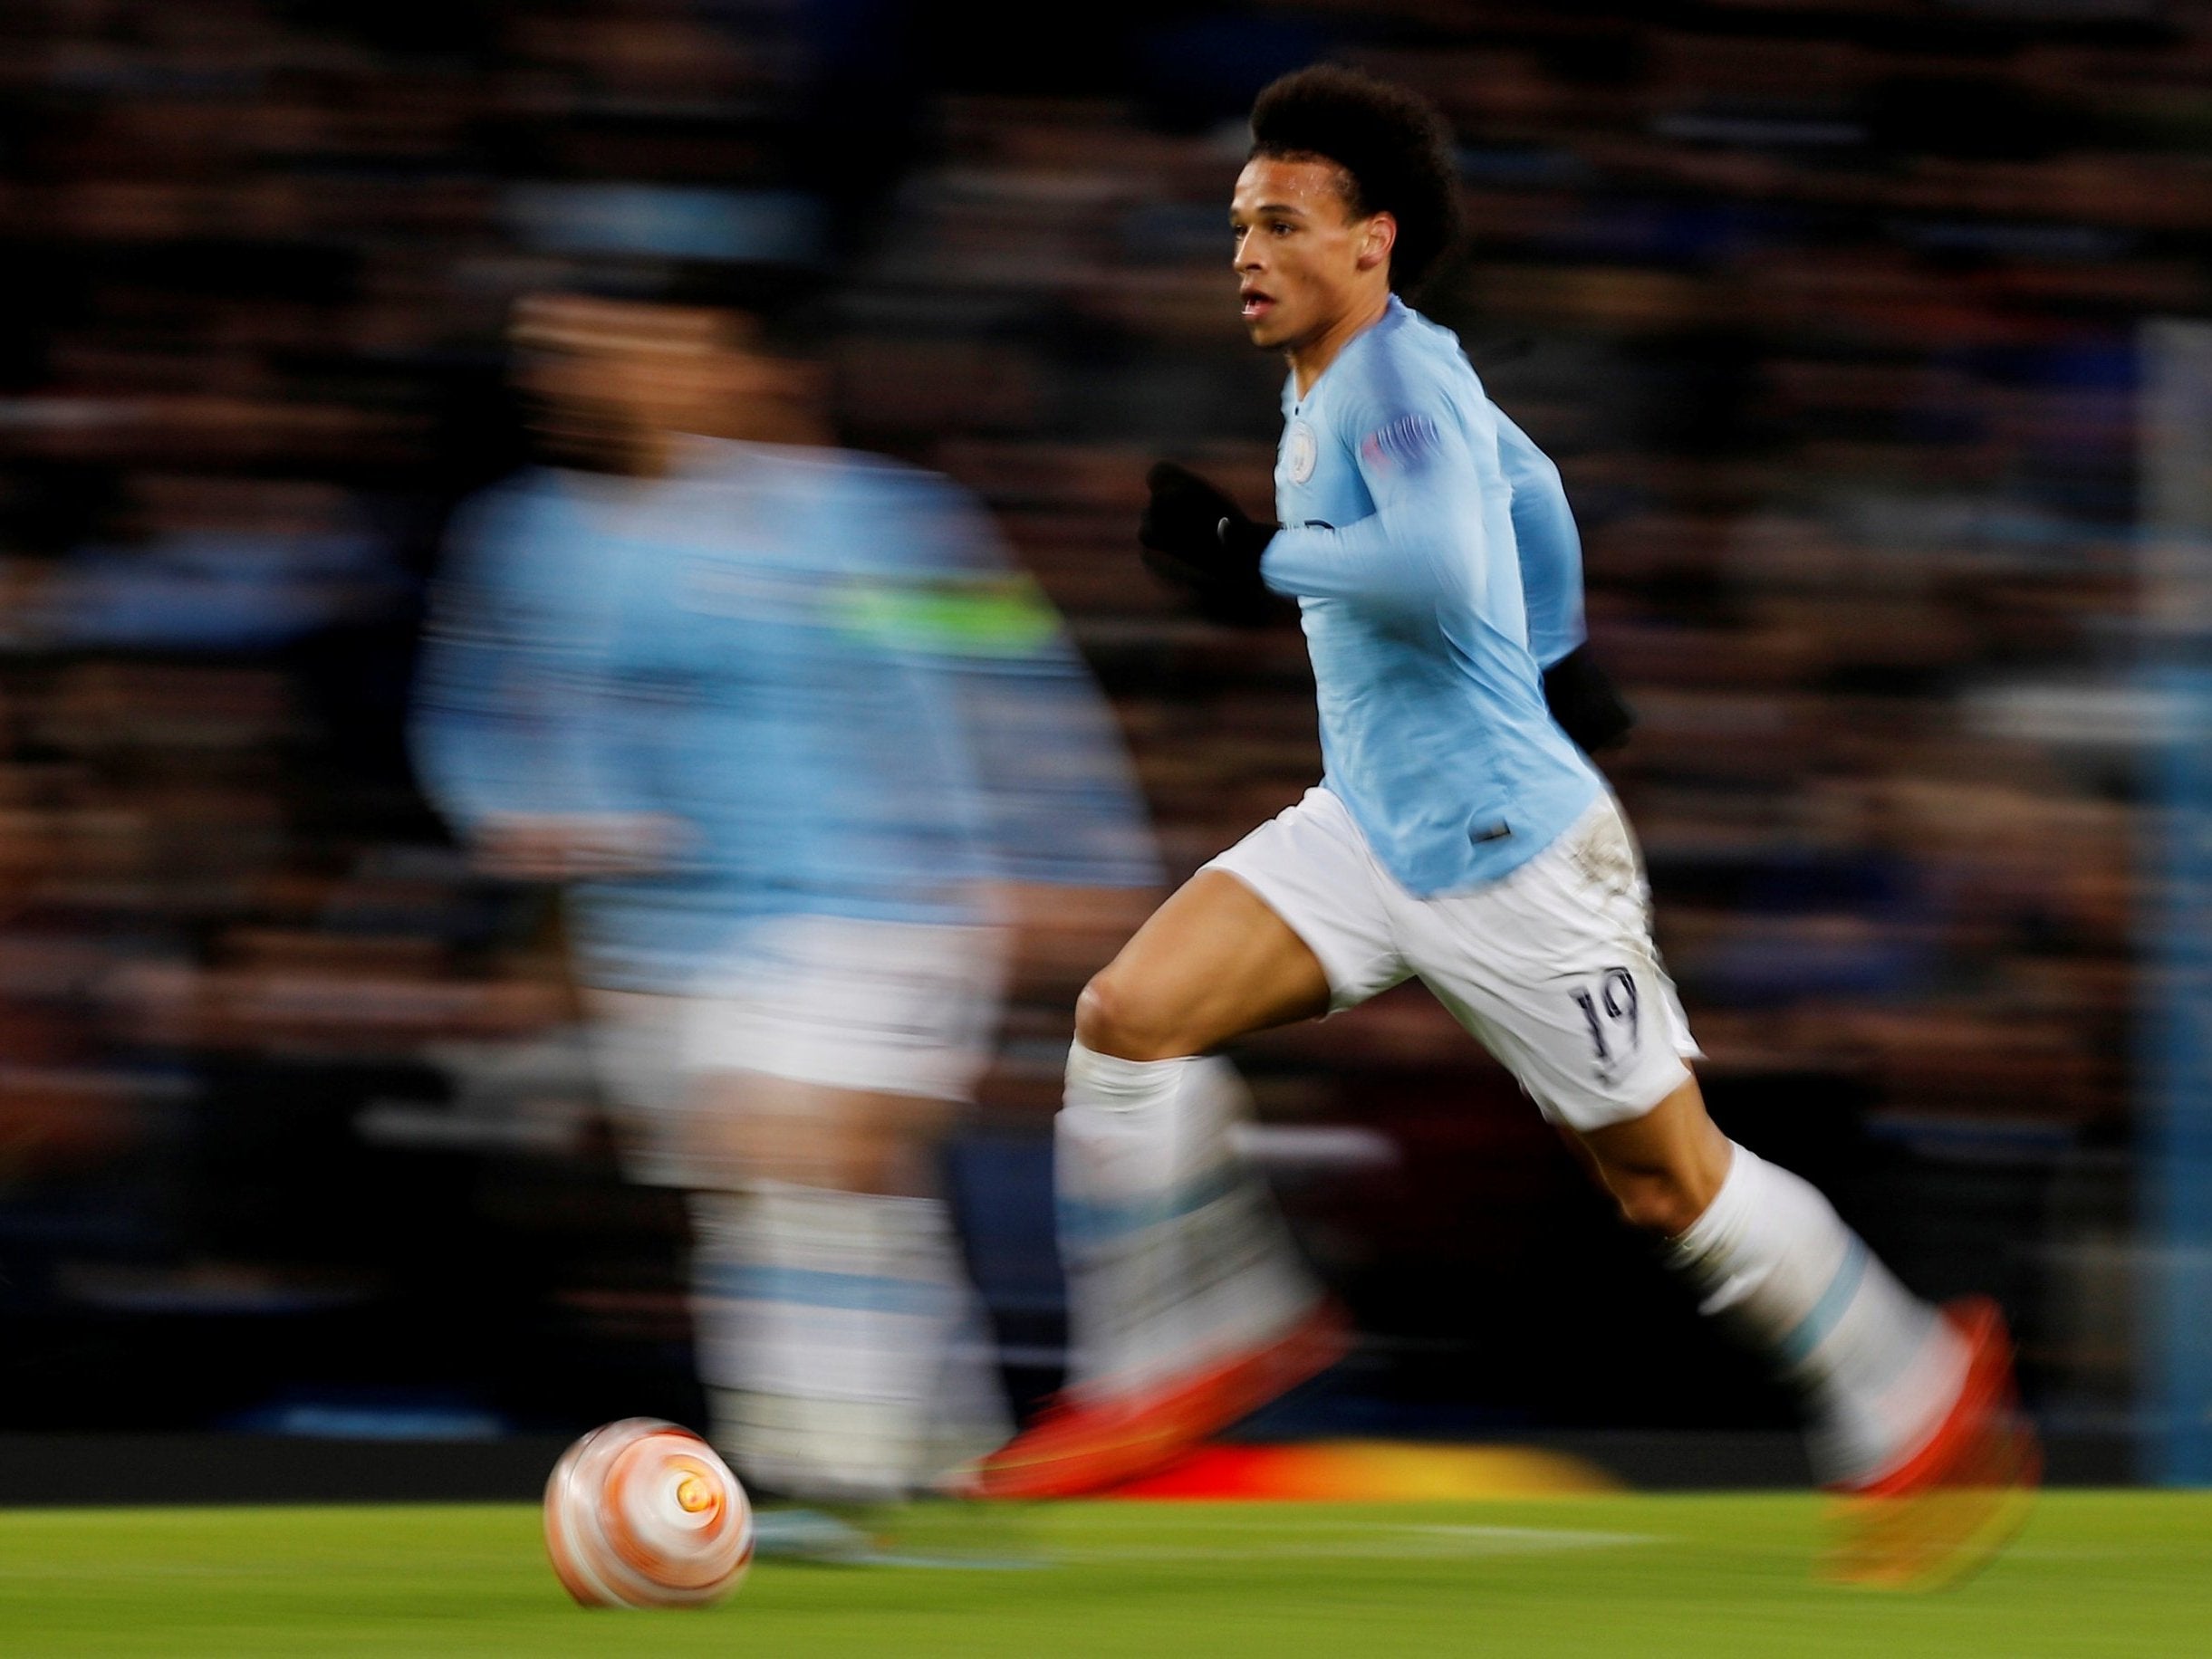 Leroy Sane was the star of Manchester City’s show